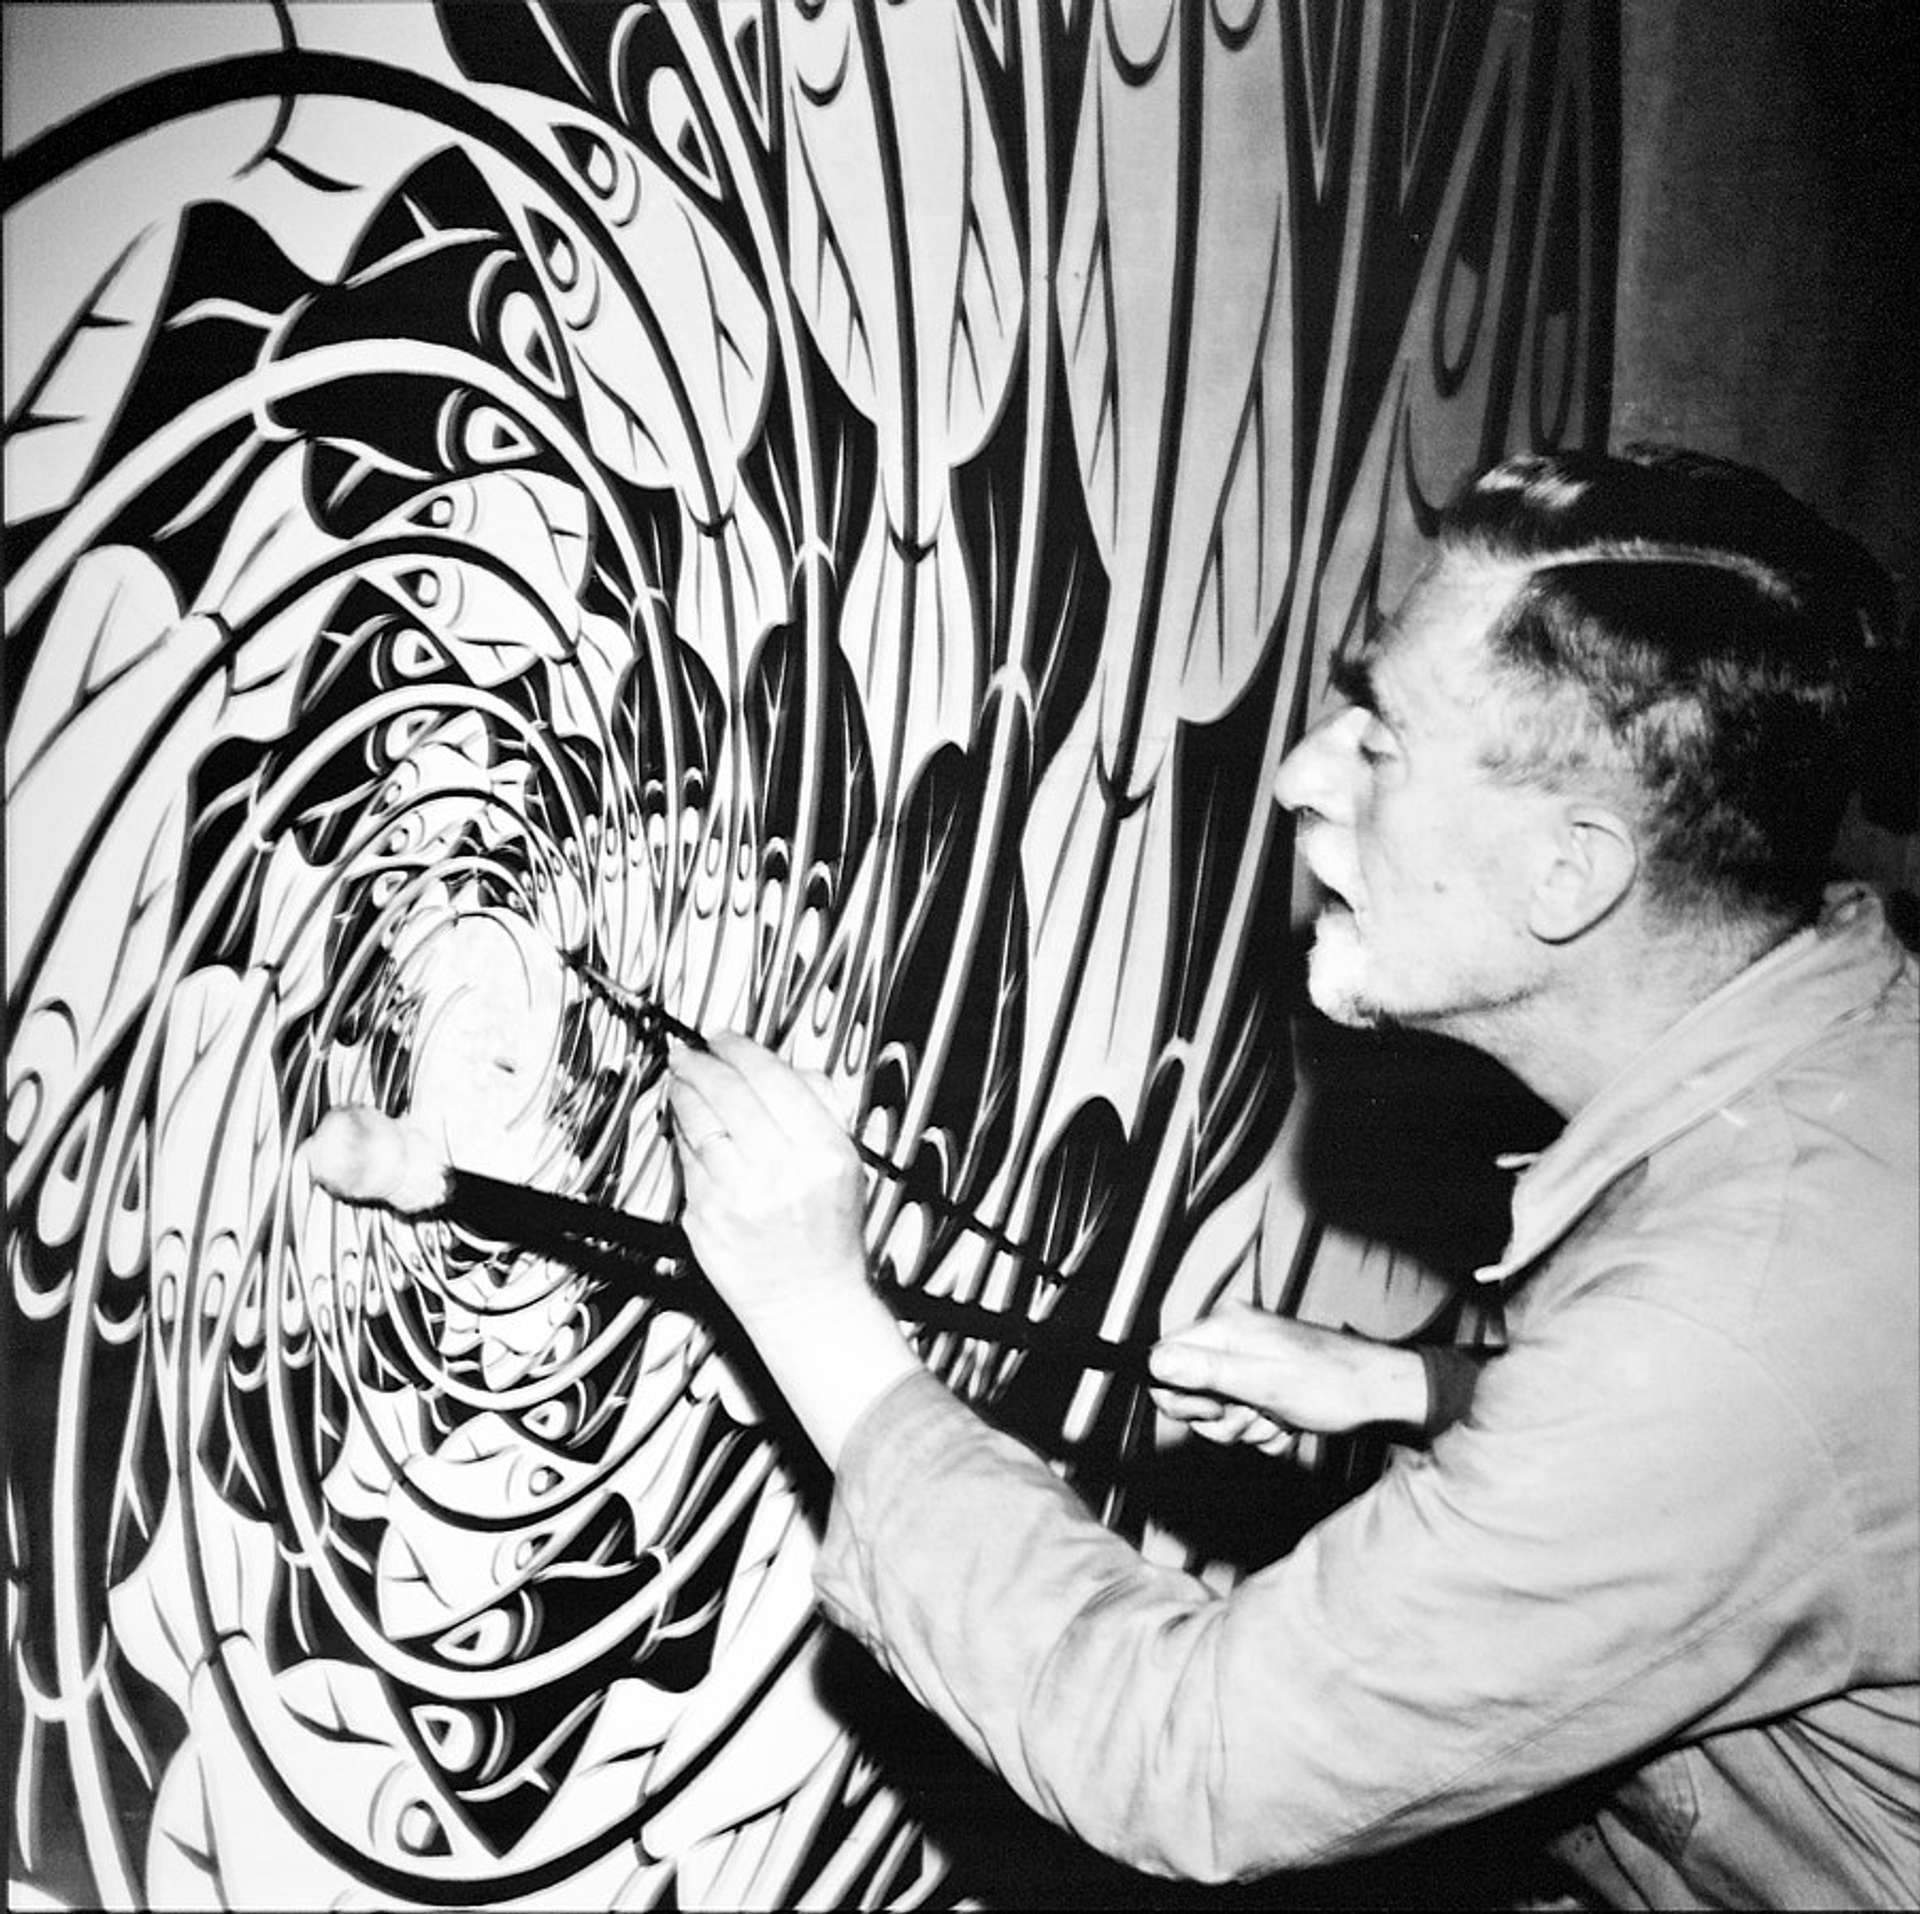 A black and white photograph of M. C. Escher working on a spiral-design painting.